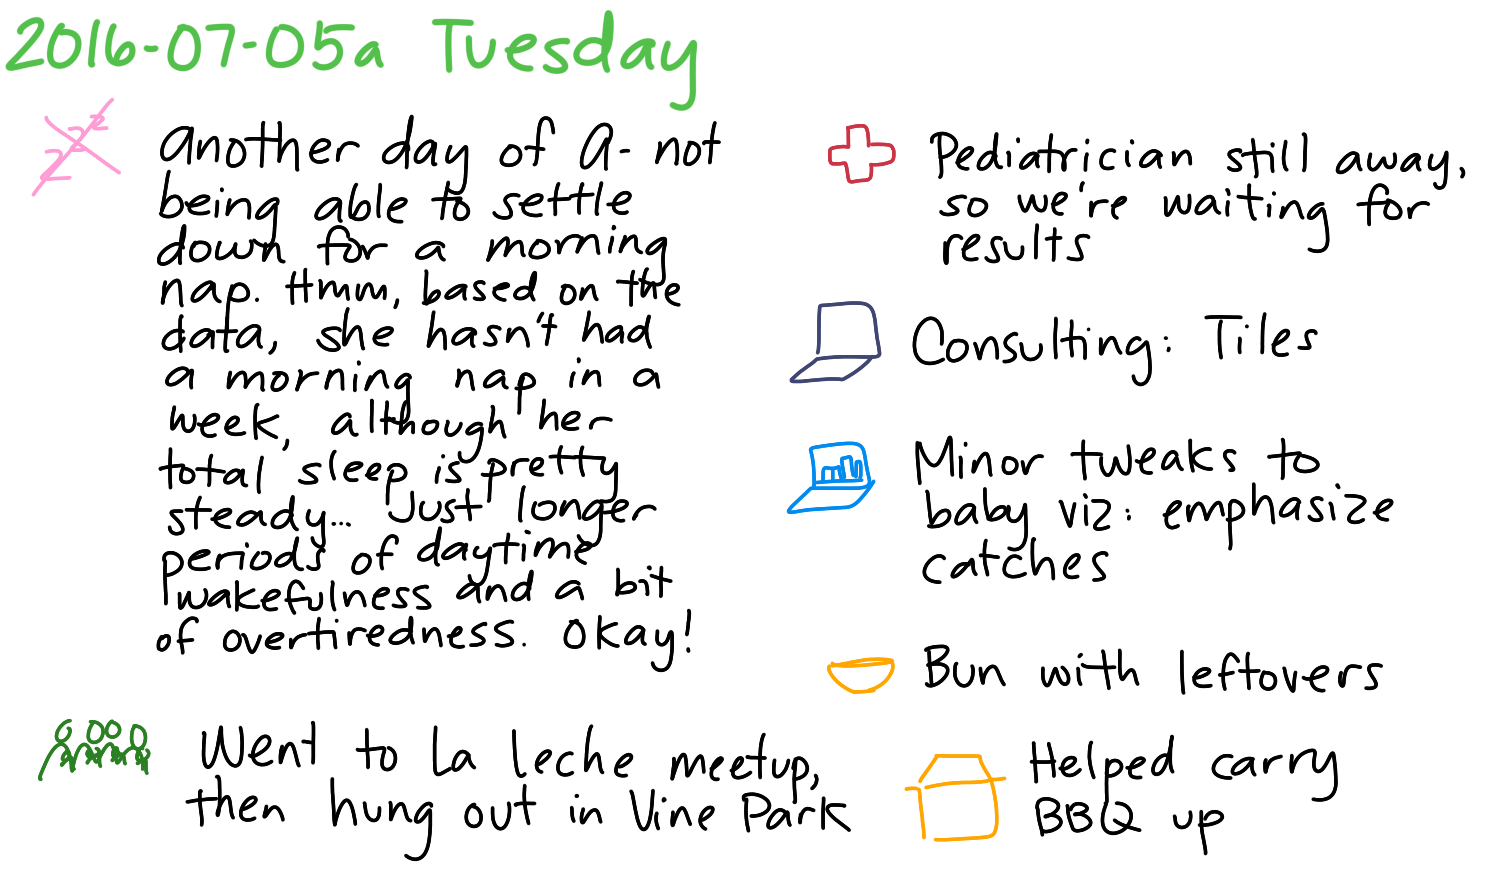 2016-07-05a Tuesday -- index card #journal.png